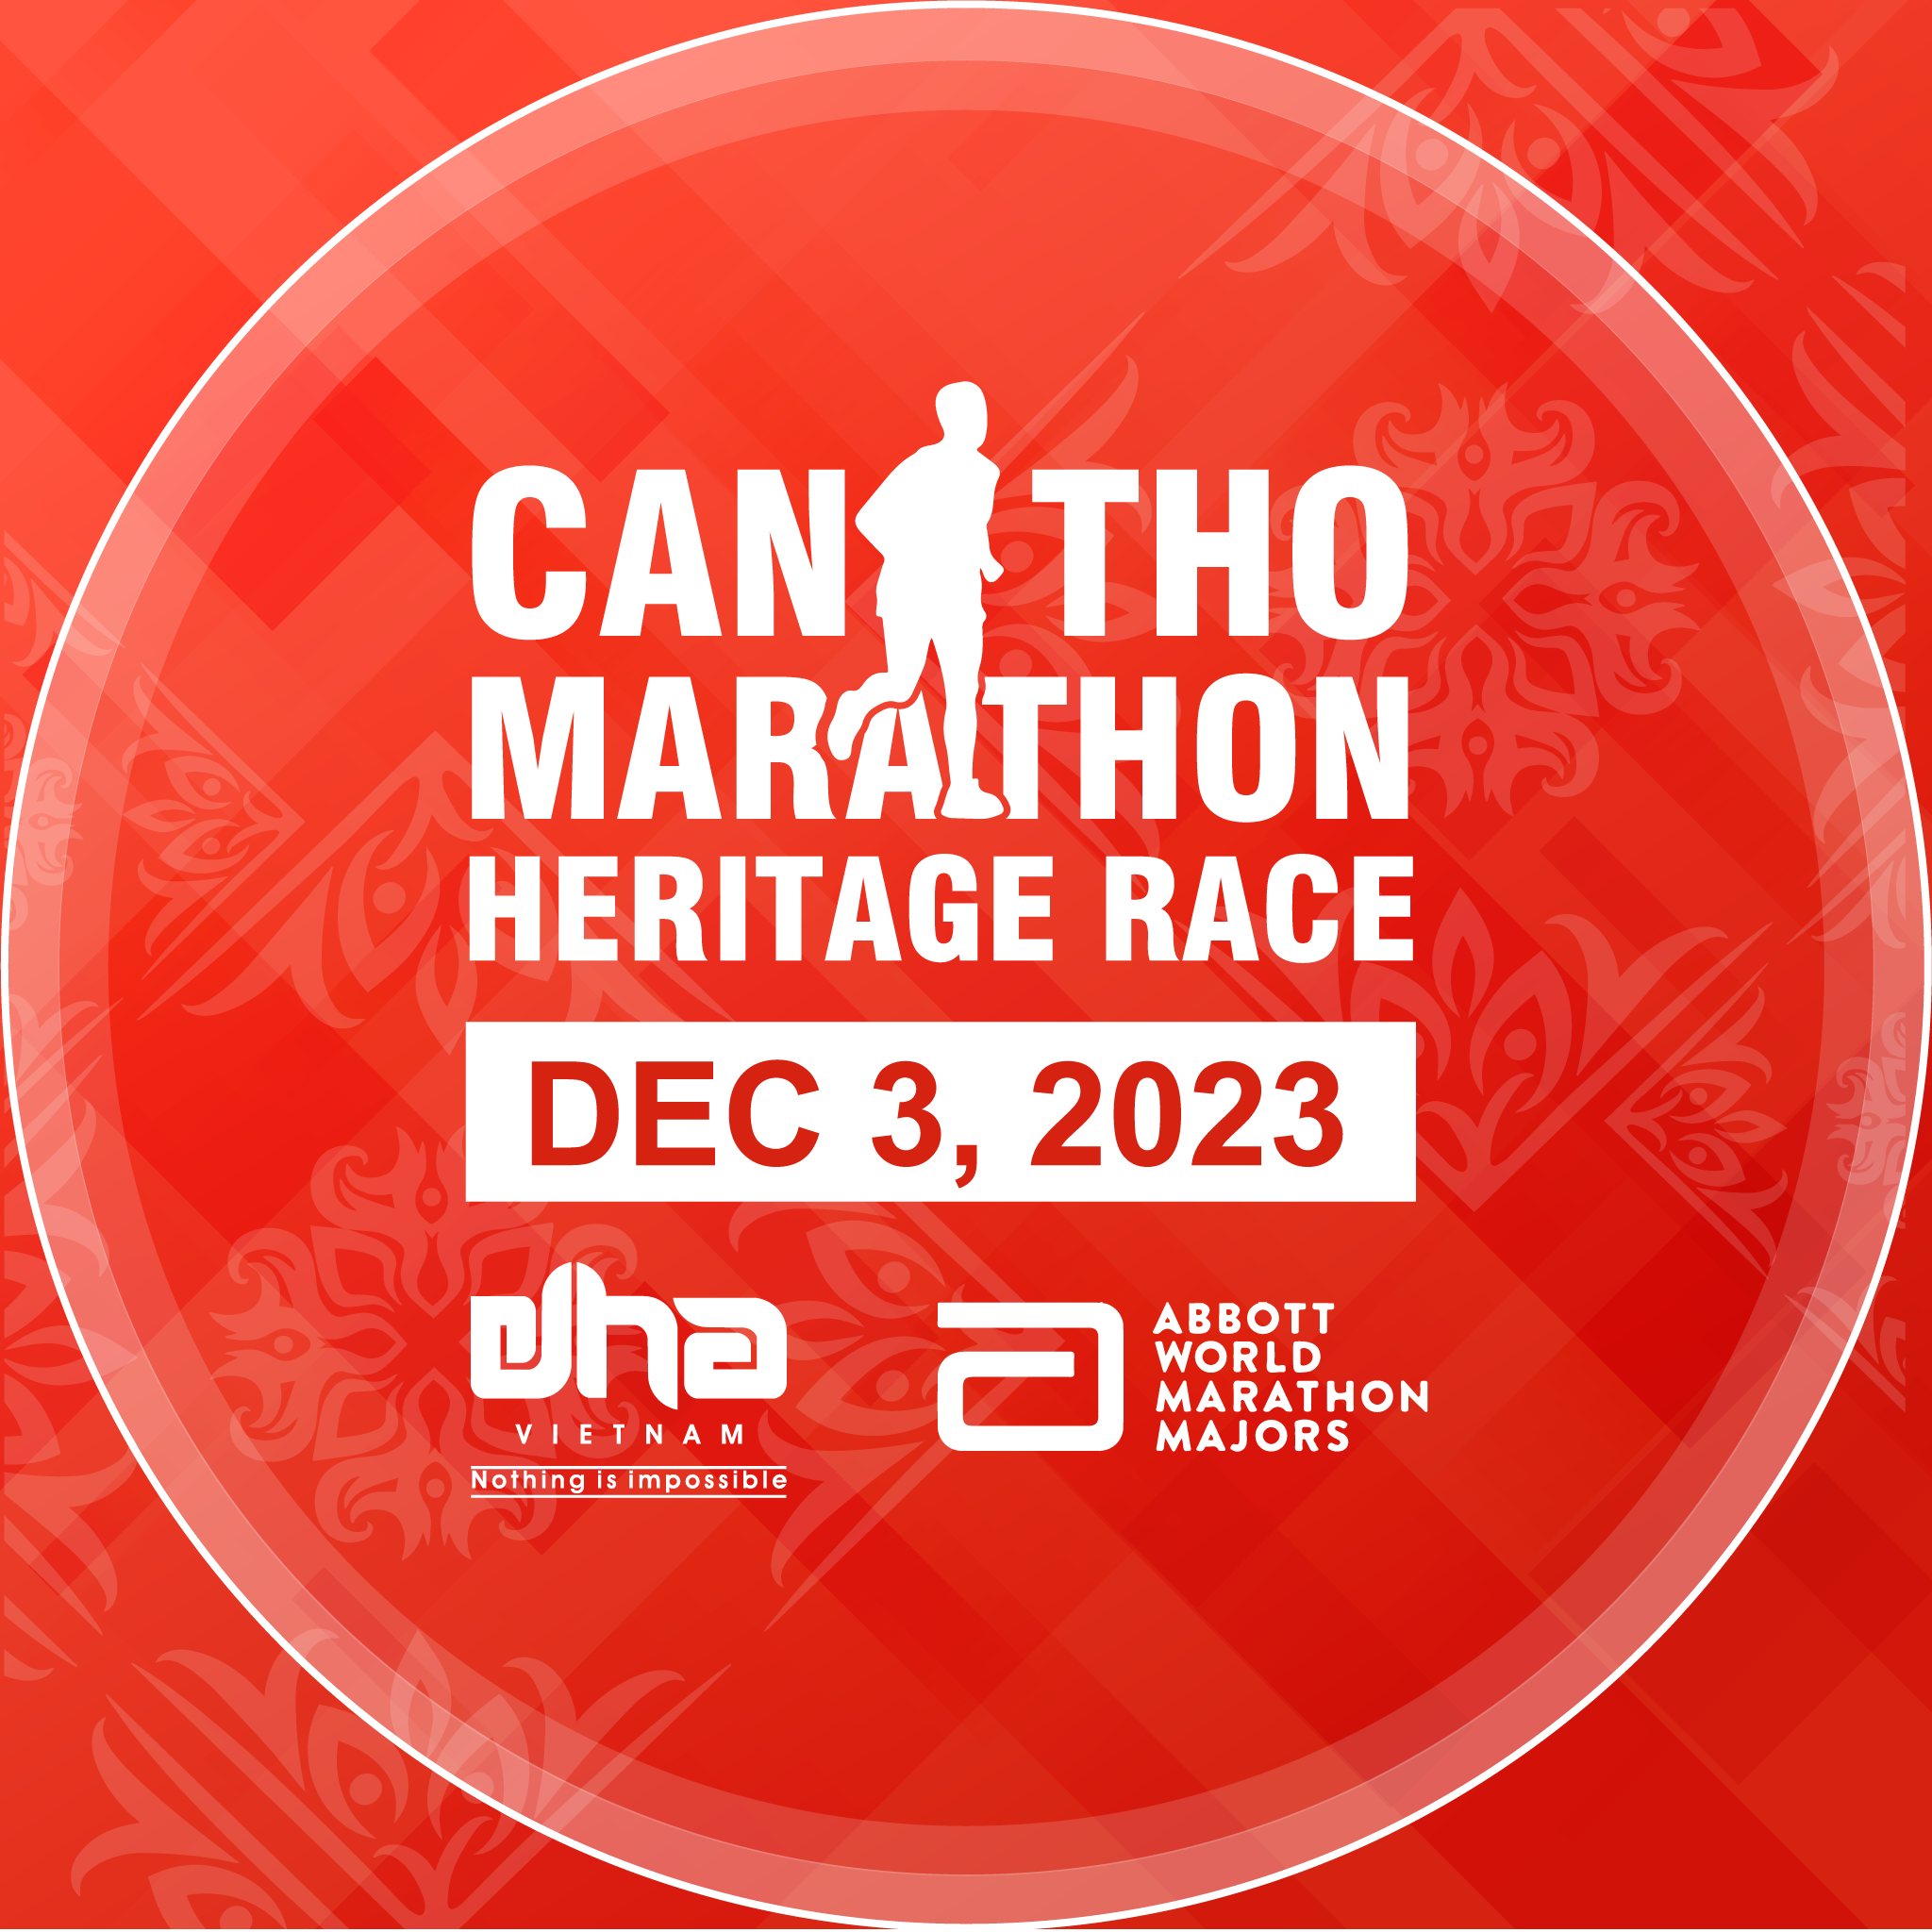 Can Tho Marathon - A Heritage Race: A Chance That Can’t Be Missed